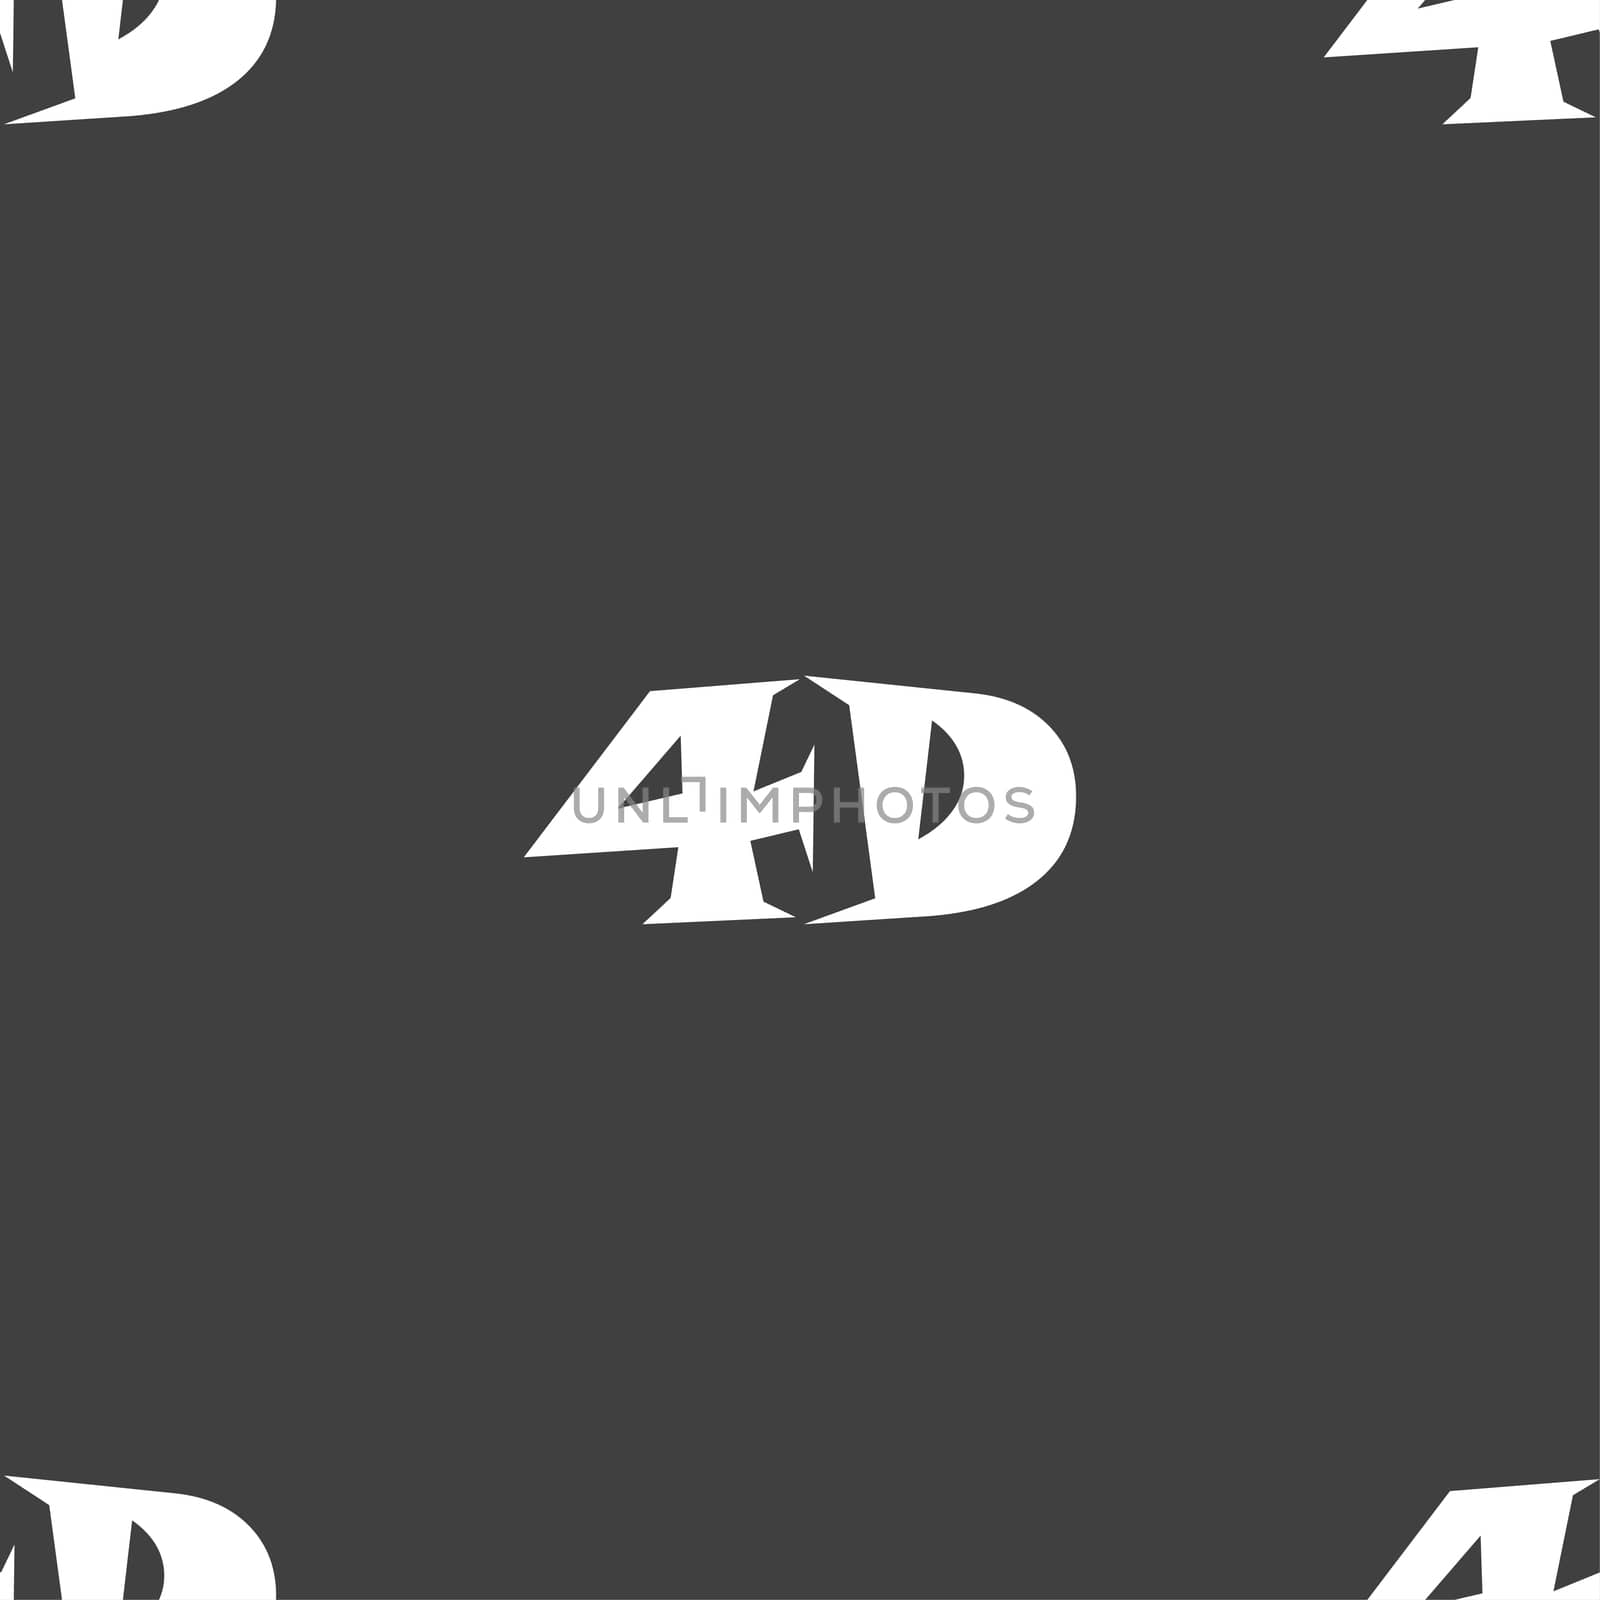 4D sign icon. 4D New technology symbol. Seamless pattern on a gray background. illustration